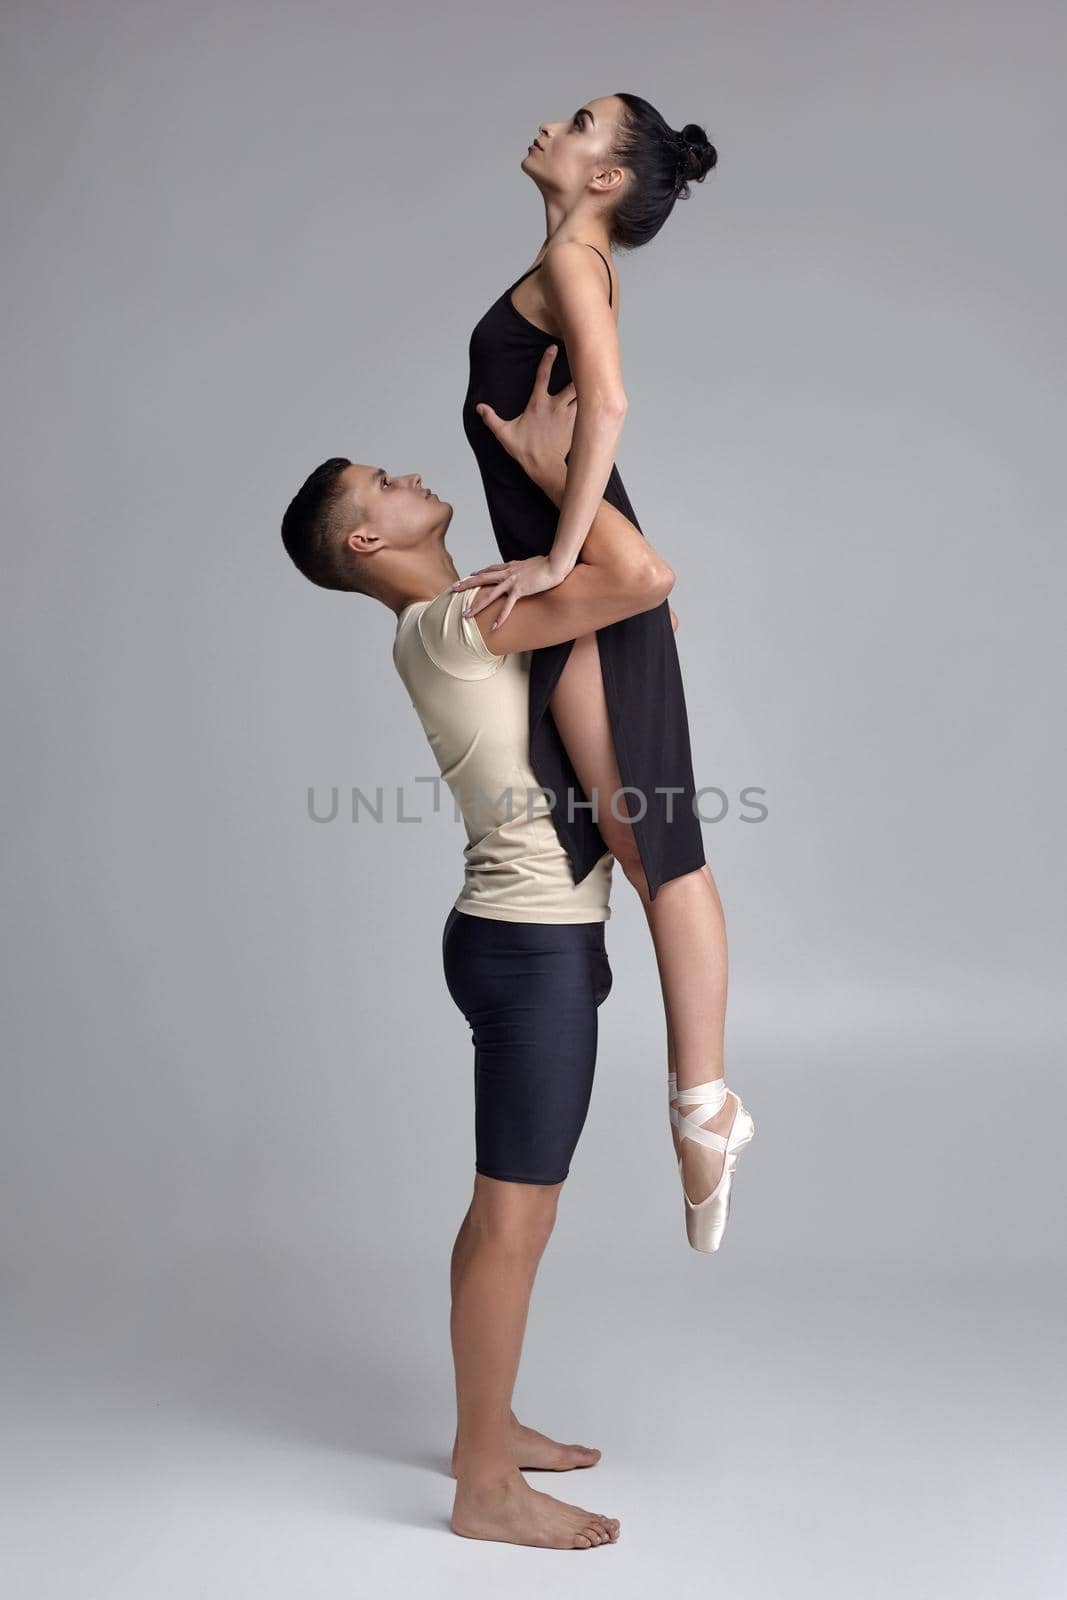 Pair of a graceful ballet dancers are posing over a gray studio background. Handsome man in black shorts with beige t-shirt is holding a beautiful woman in a black dress and white pointe shoes in his strong hands. Ballet and contemporary choreography concept. Art photo.